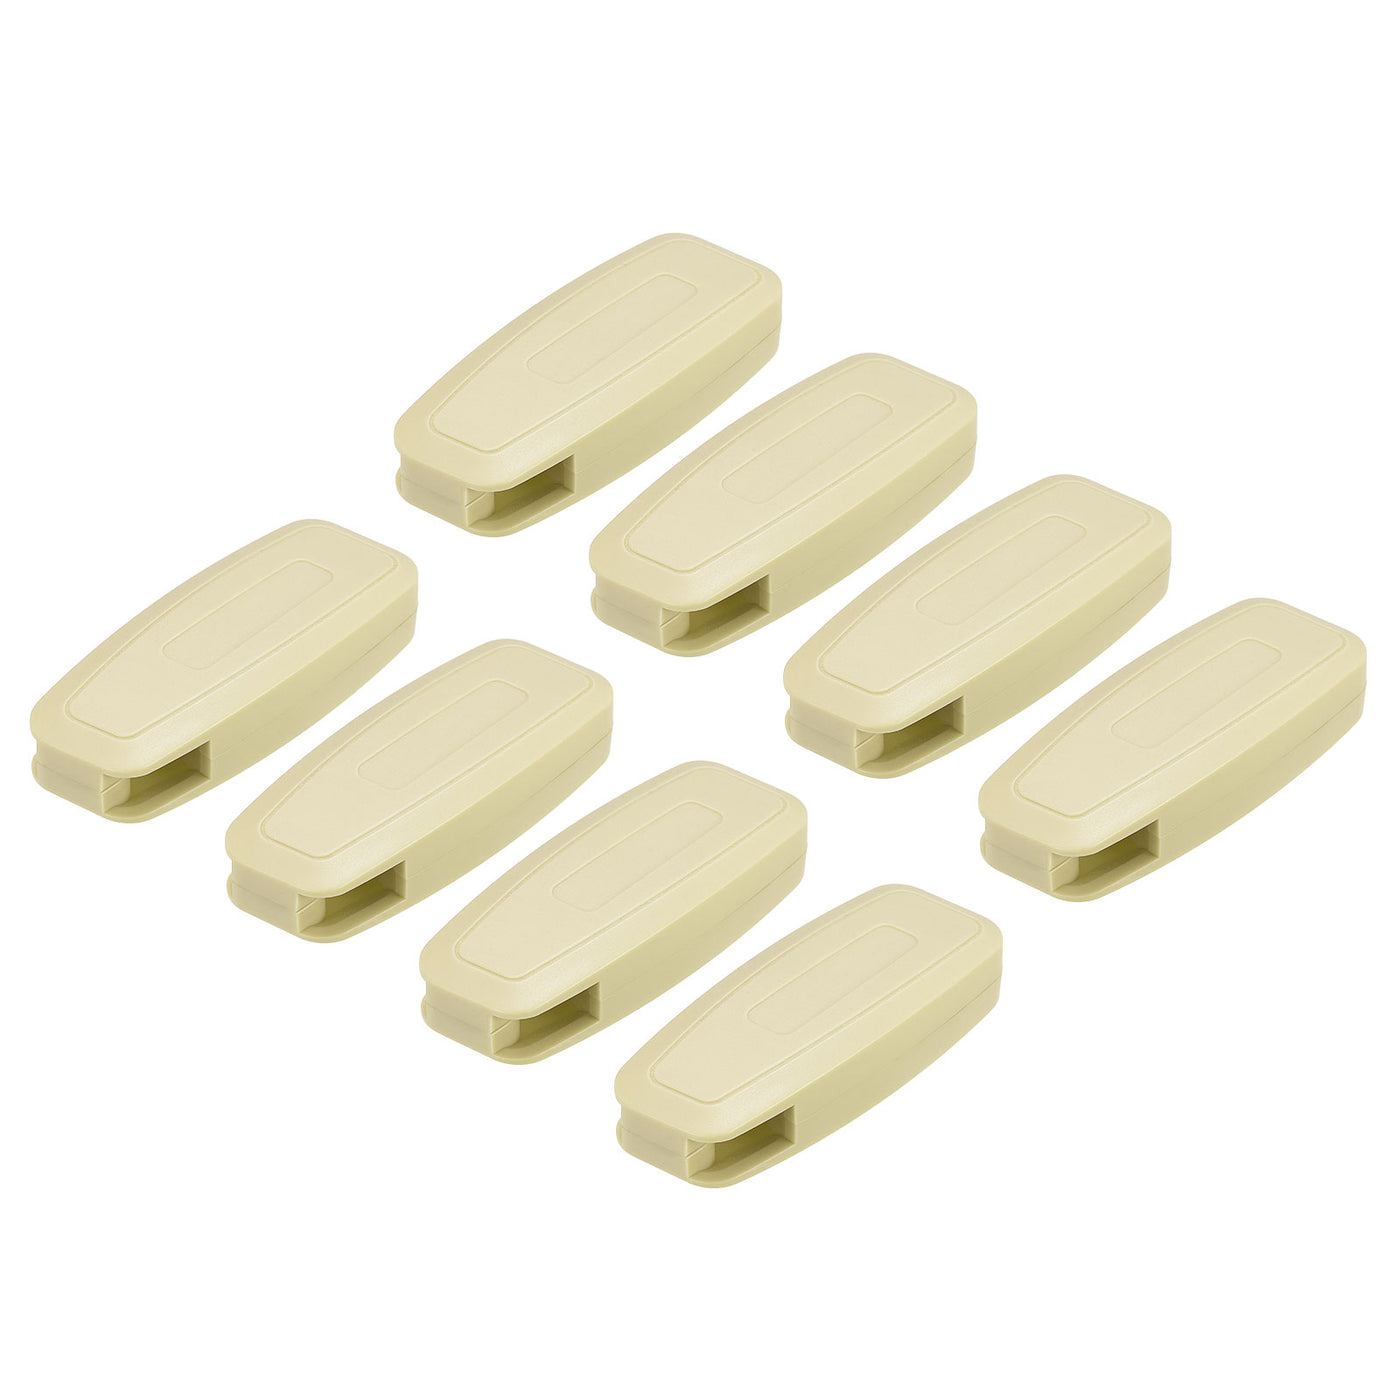 uxcell Uxcell Blinds Chain Handle, 8Pcs 80mm Roller Shade Cord Weights for Window Parts, Khaki